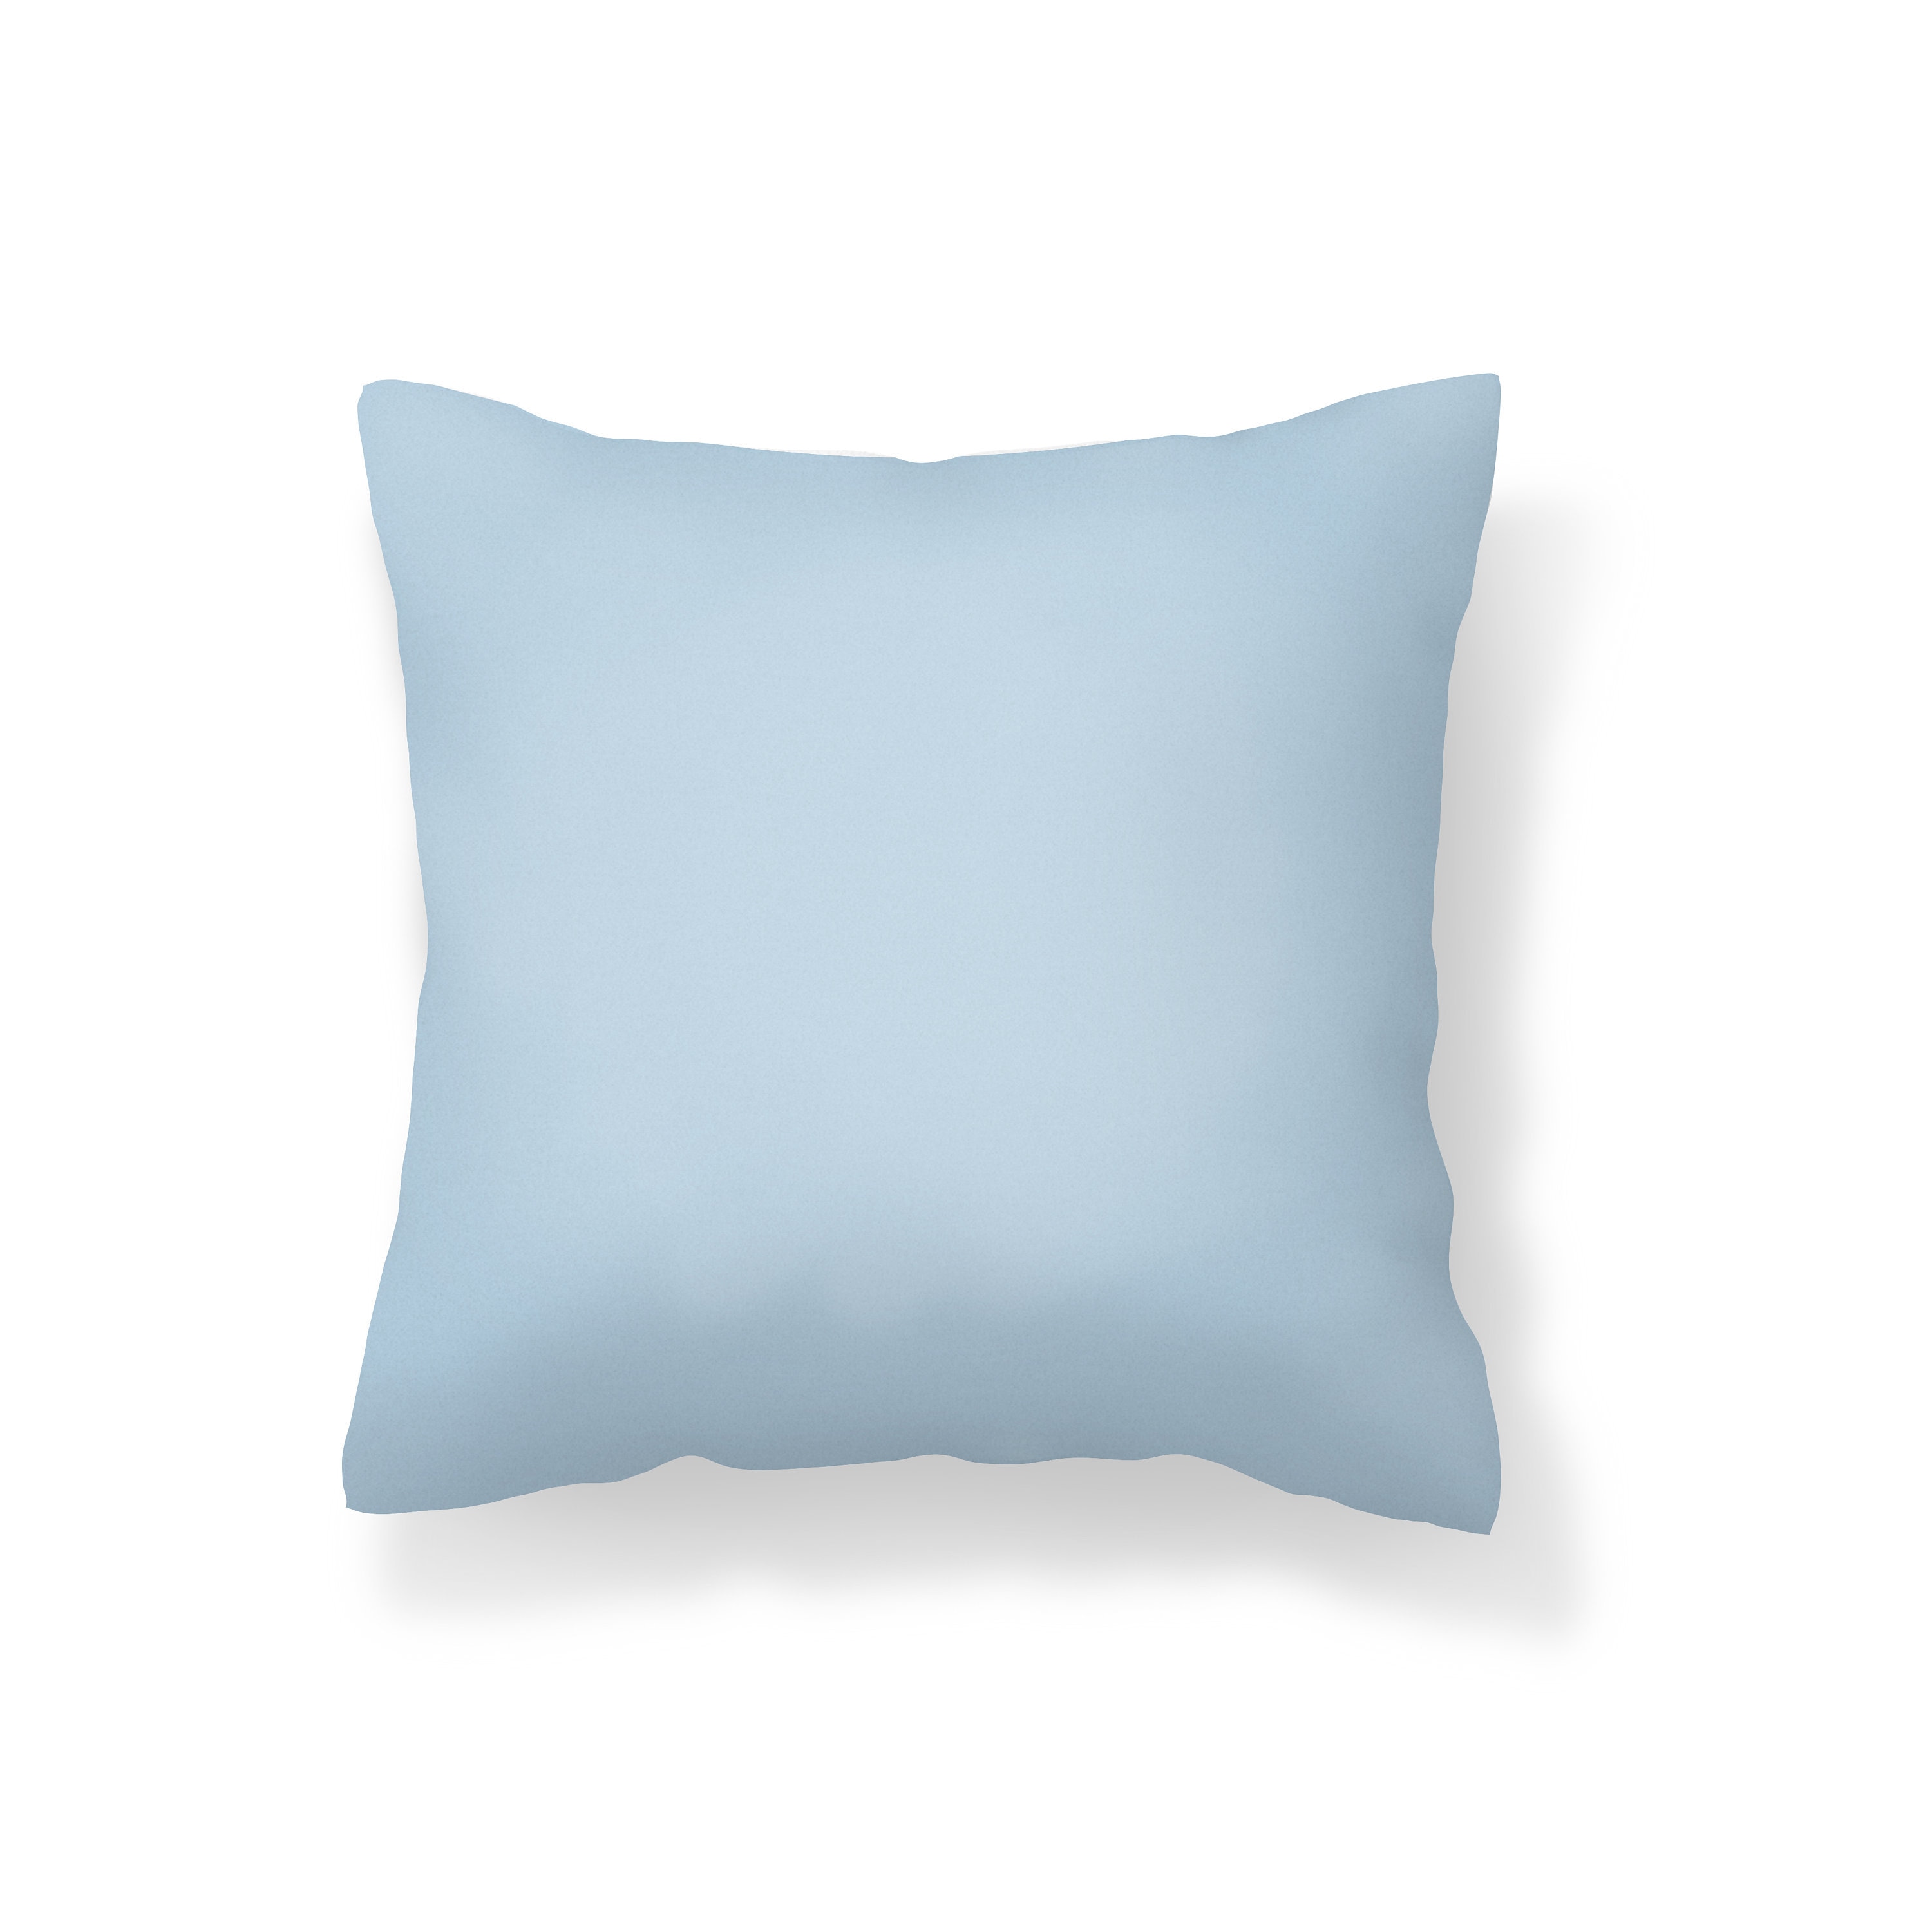 Solid Light Blue Throw Pillow Cover, Light Blue Throw Pillow Covers